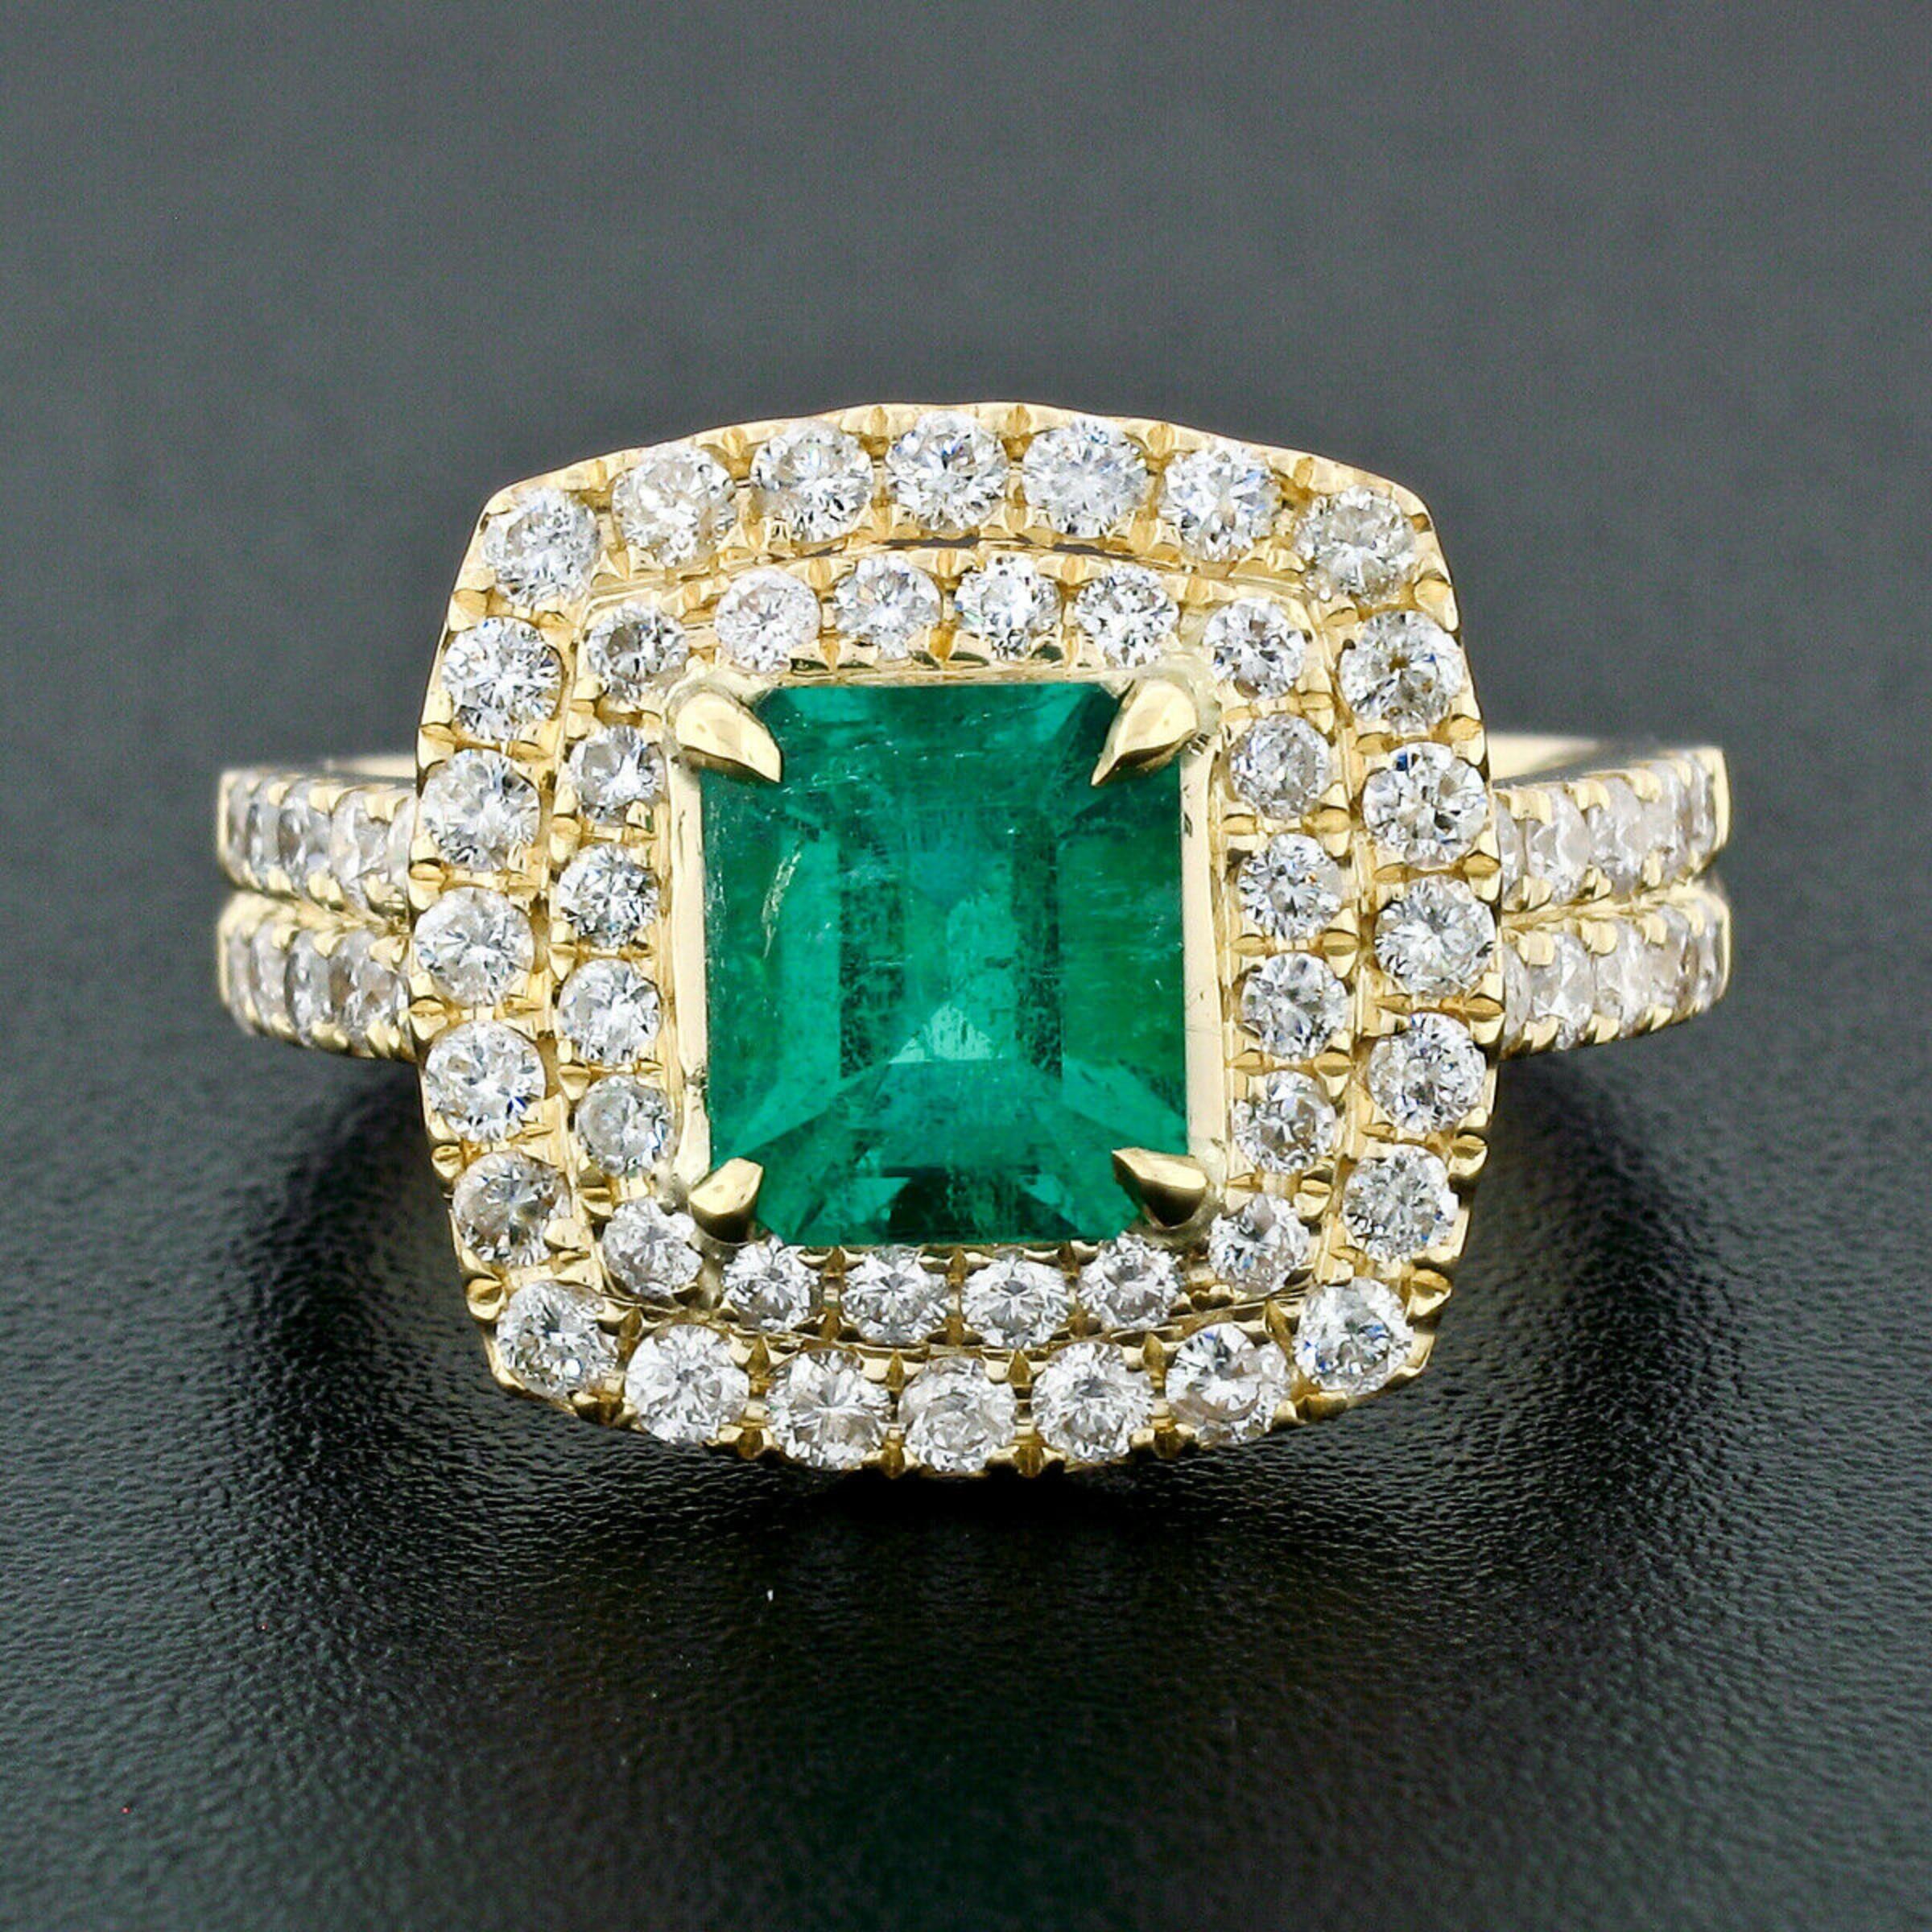 This truly breathtaking, GIA certified, emerald and diamond cocktail ring is crafted in in solid 18k yellow gold. The ring features a breathtaking, natural, octagonal step cut emerald stone that displays one of the FINEST and most lively rich green